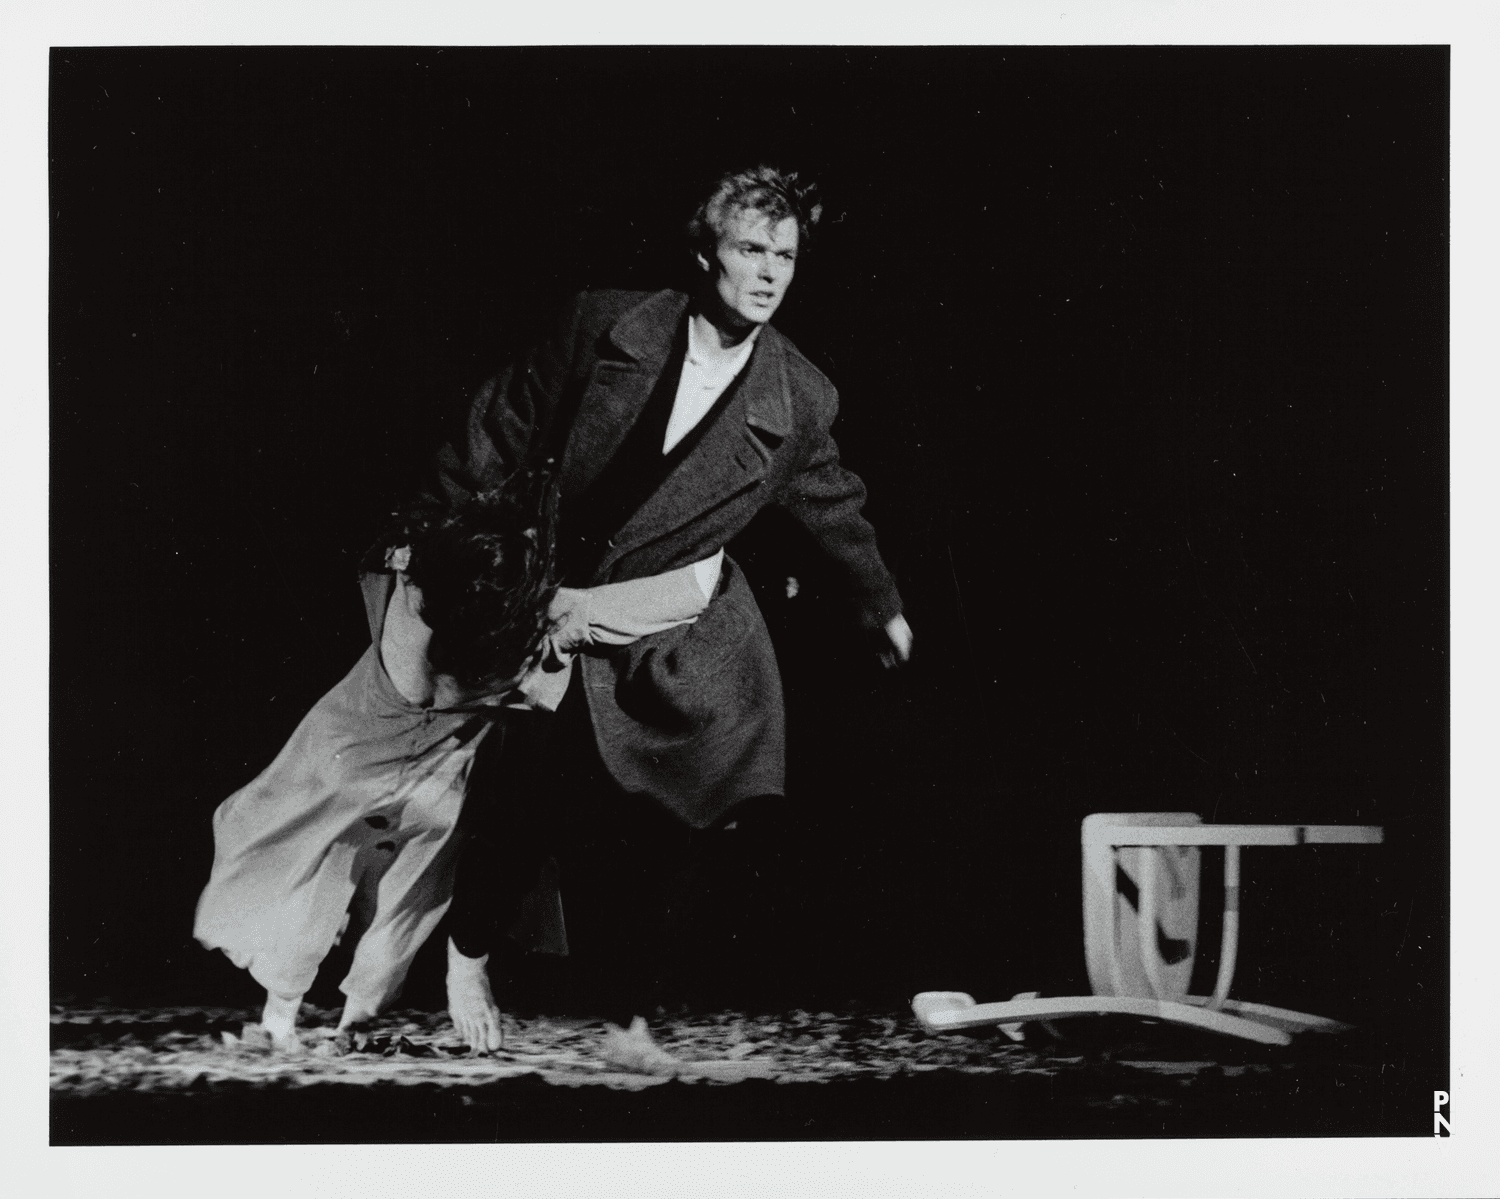 Beatrice Libonati and Hans Beenhakker in “Bluebeard. While Listening to a Tape Recording of Béla Bartók's Opera "Duke Bluebeard's Castle"” by Pina Bausch